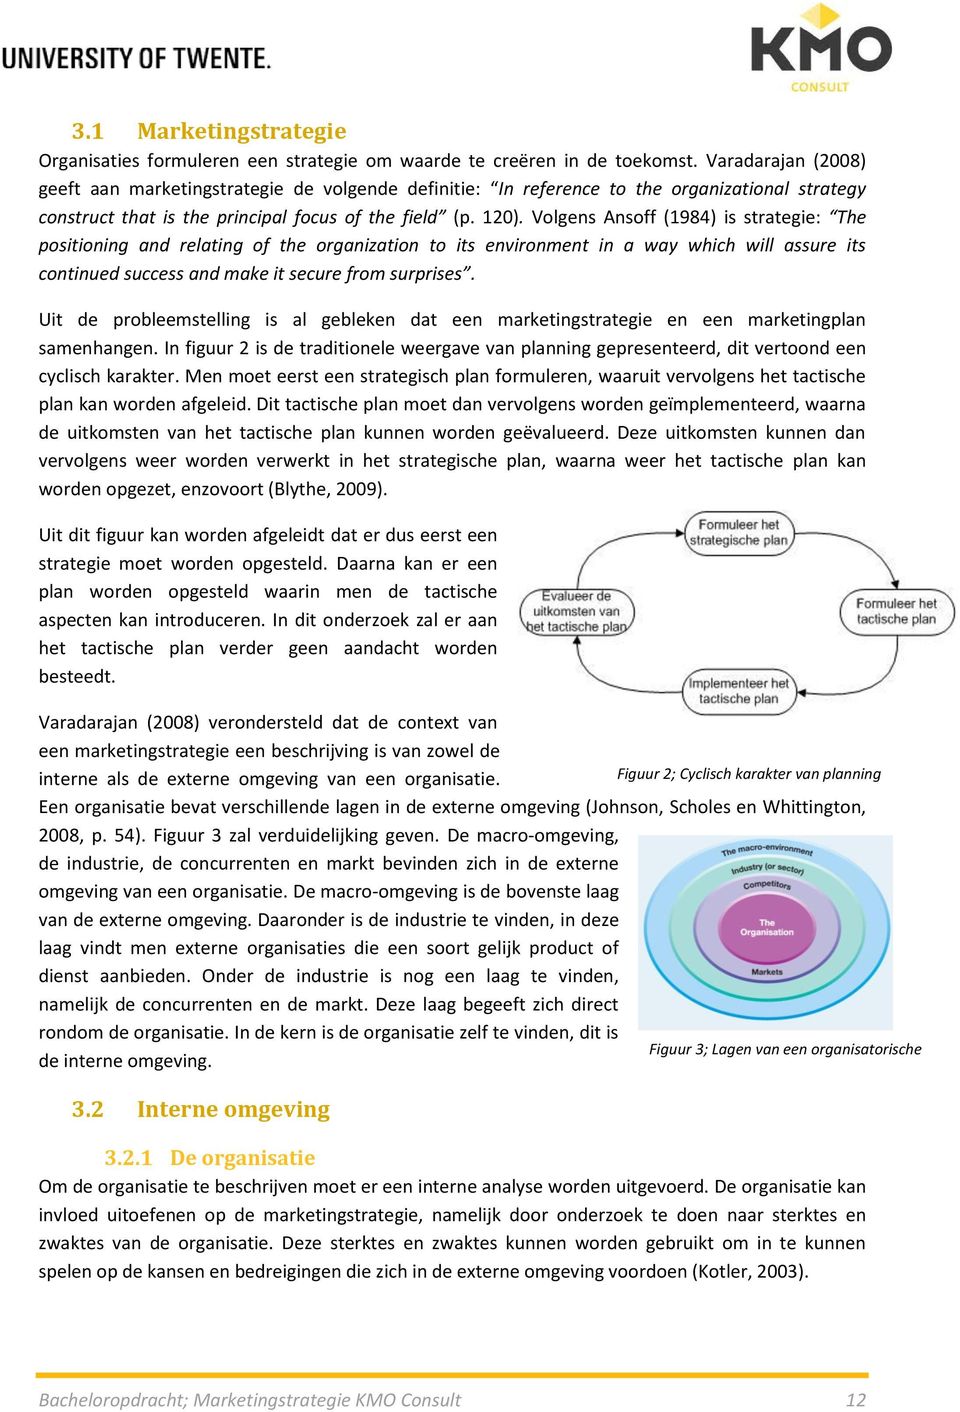 Volgens Ansoff (1984) is strategie: The positioning and relating of the organization to its environment in a way which will assure its continued success and make it secure from surprises.